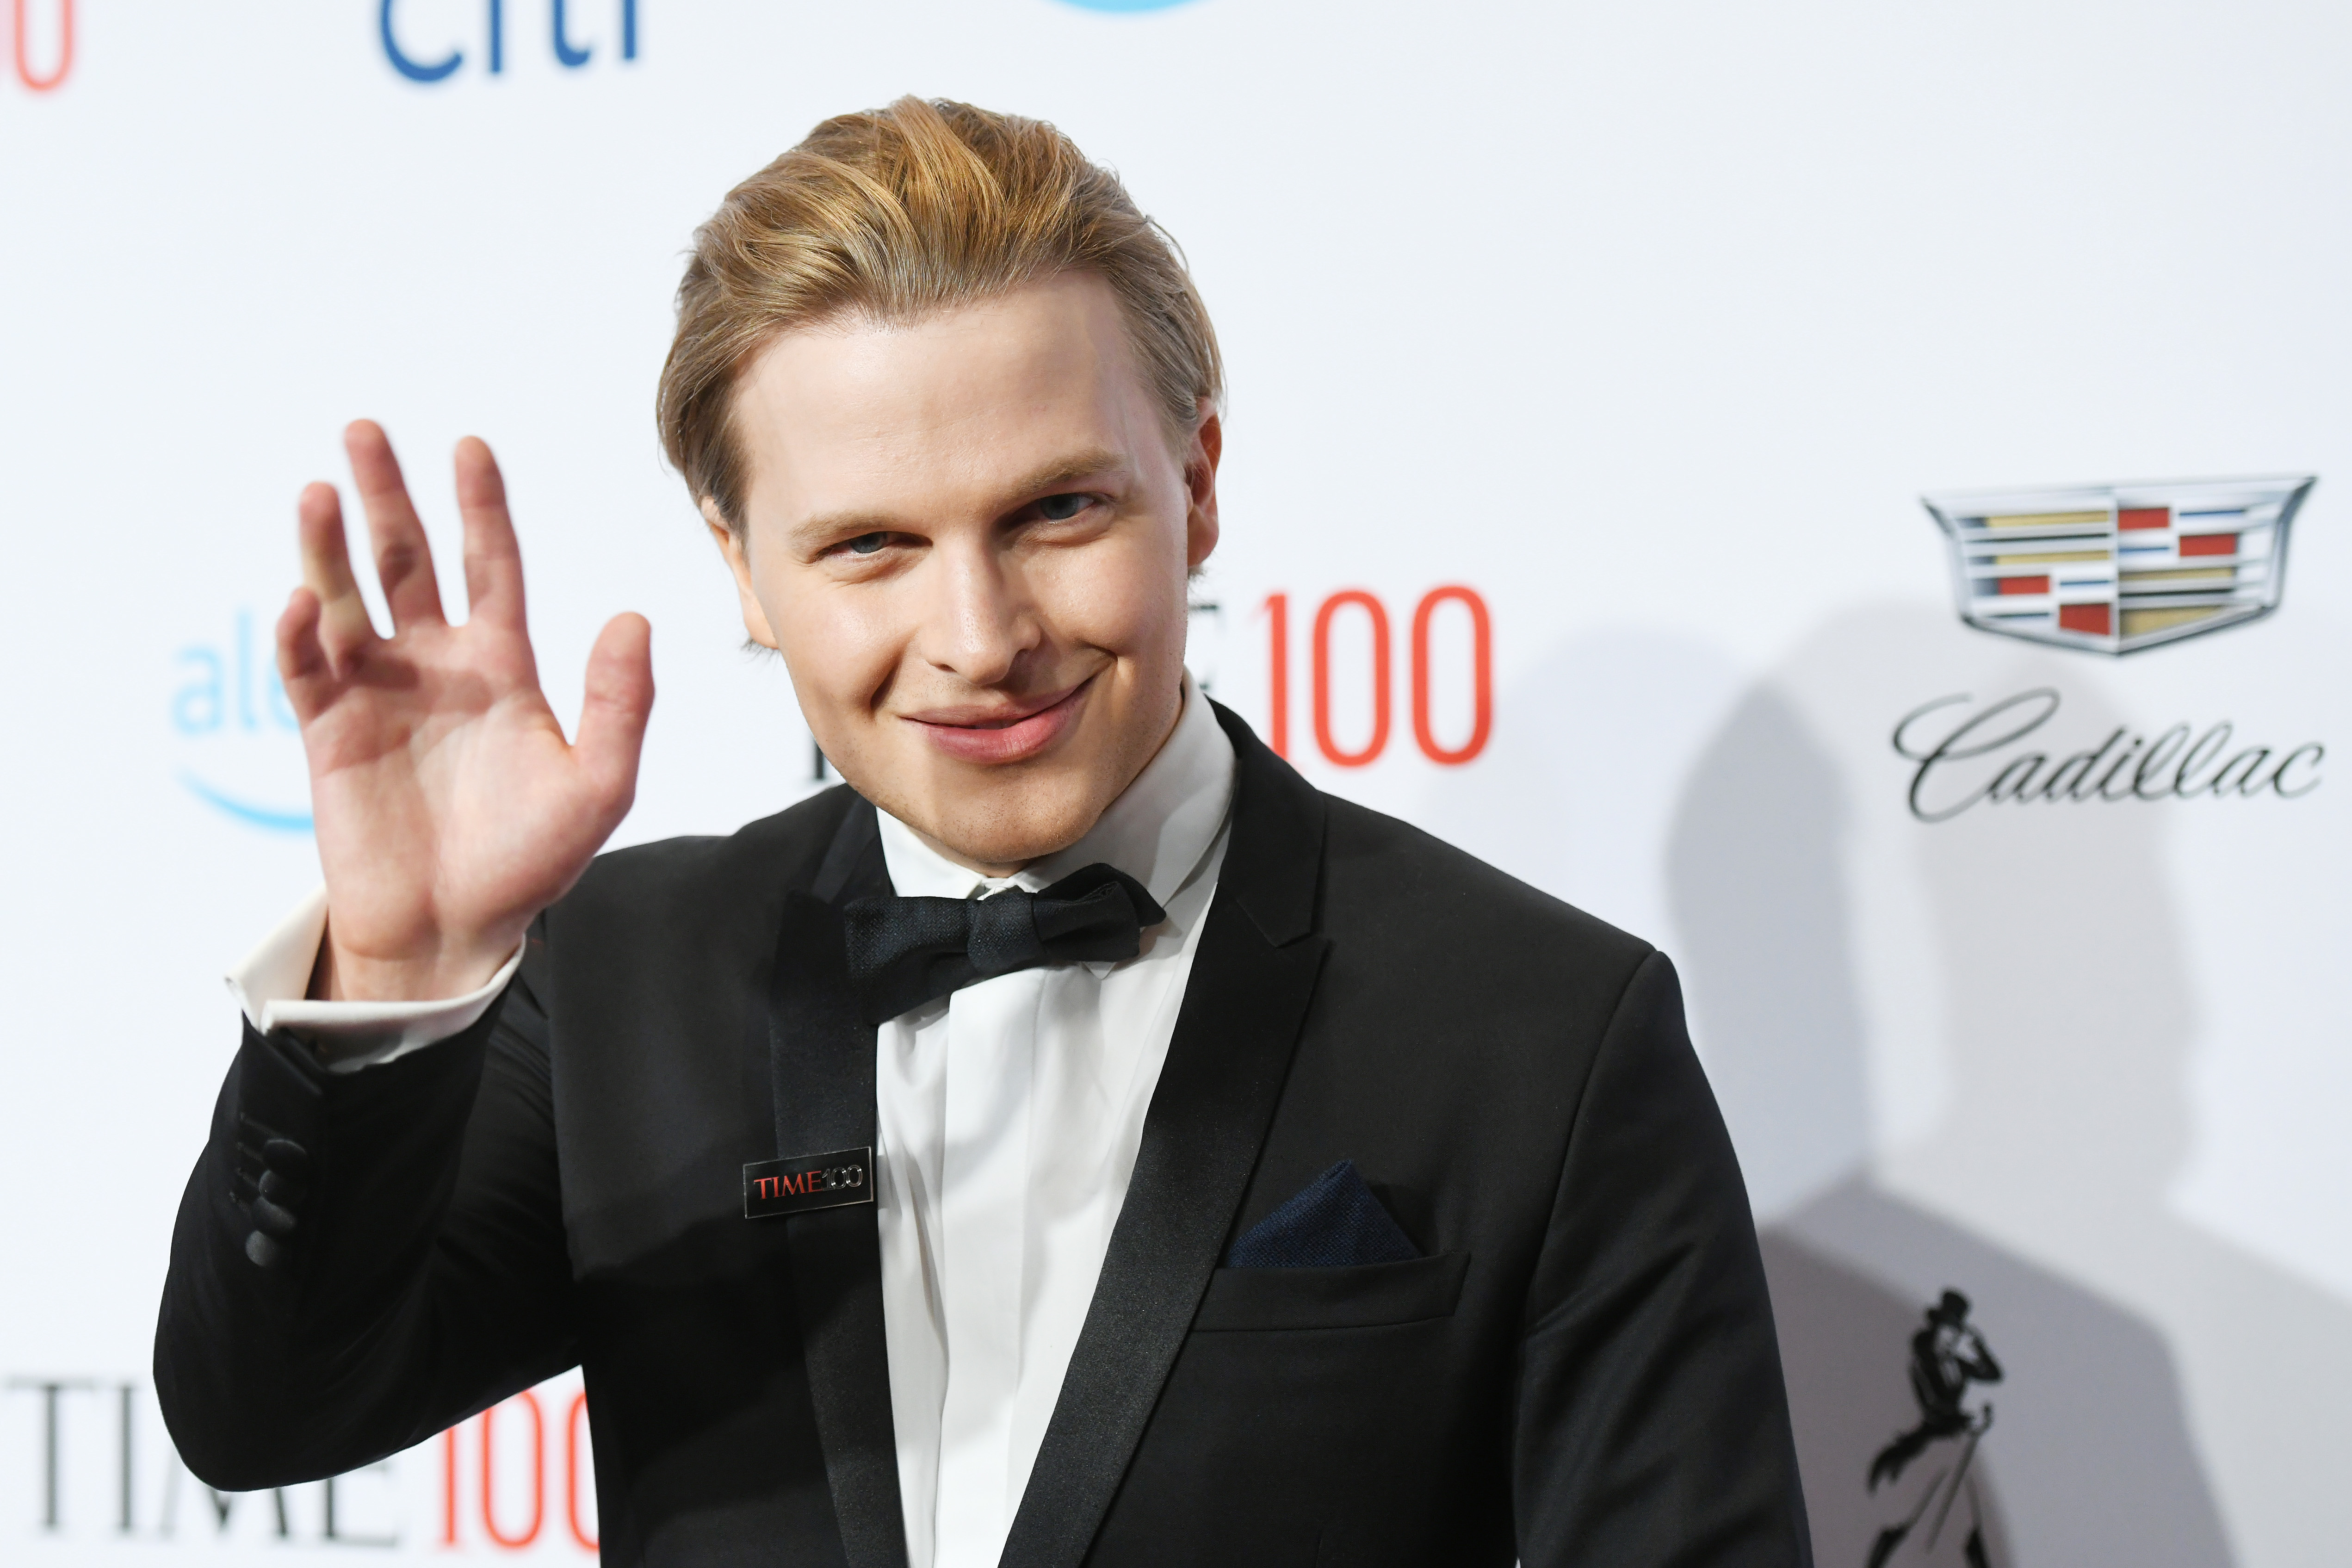 Ronan Farrow attends the TIME 100 Gala 2019 Lobby Arrivals at Jazz at Lincoln Center on April 23, 2019 in New York City. (Noam Galai/Getty Images for TIME)